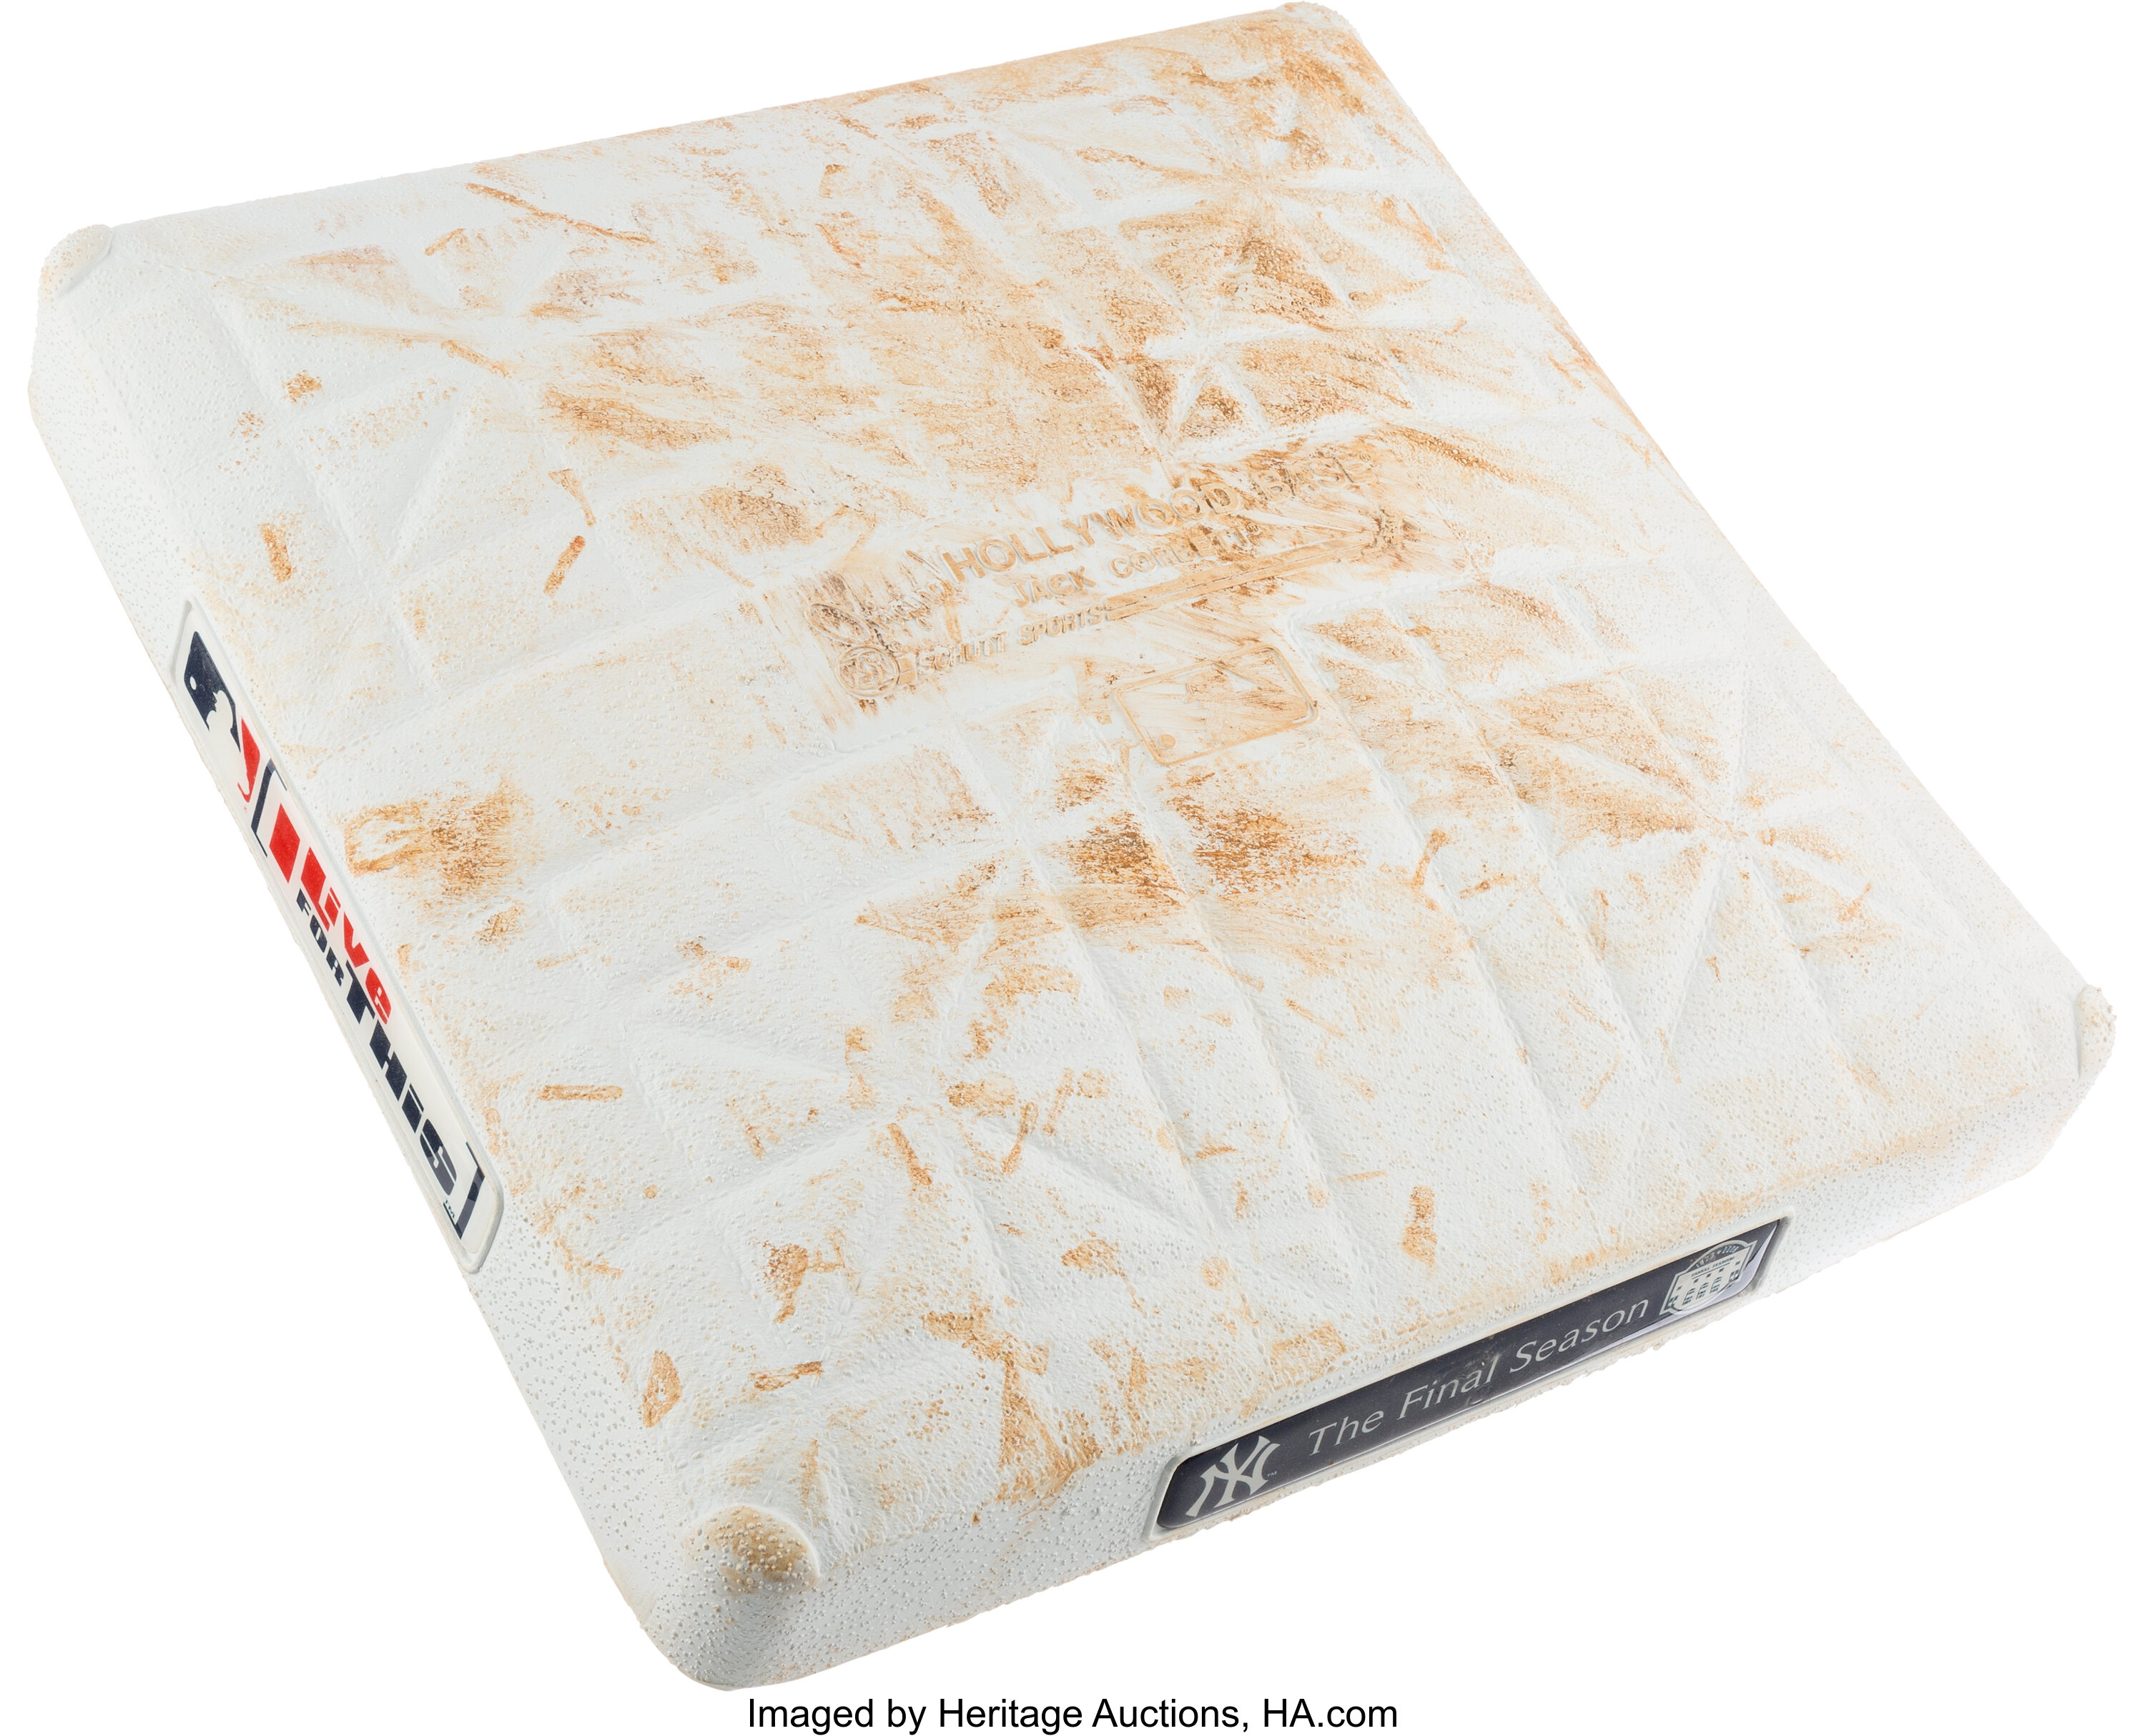 New York Yankees Game-Used Base Used During the Entire Series vs